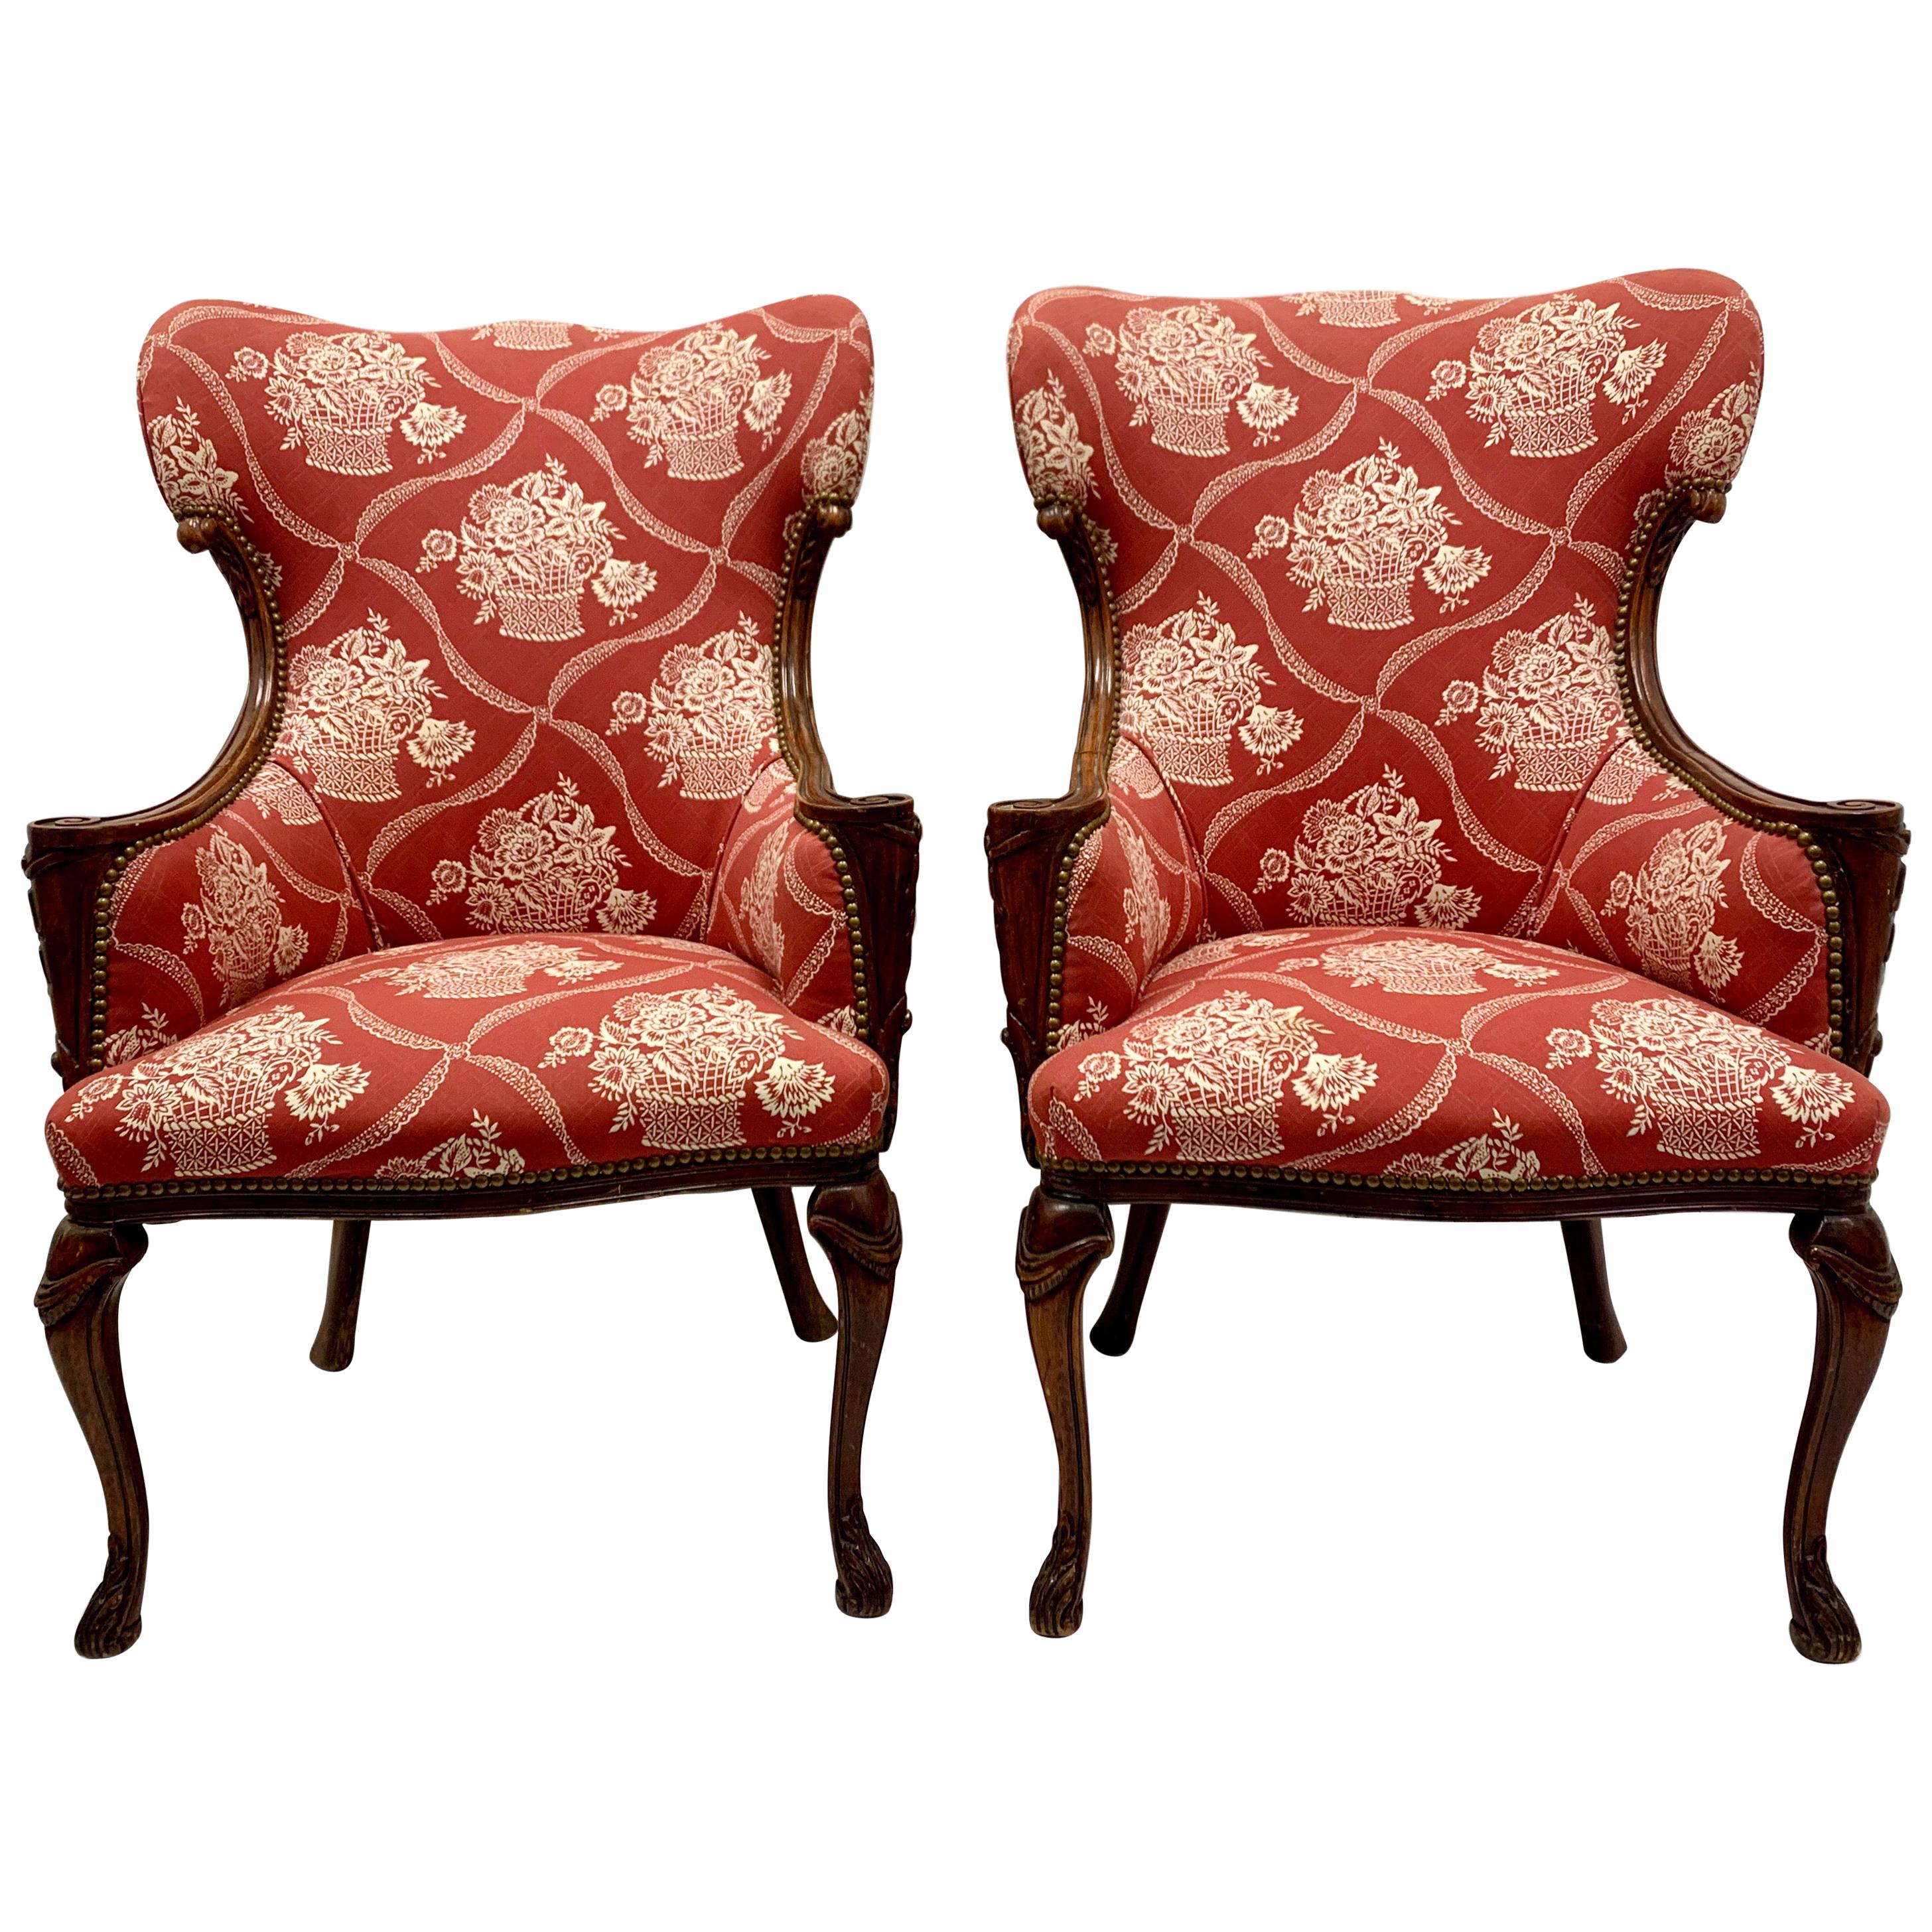 Antique French Carved Mahogany Wing Chairs in Schumacher Fabric, Pair For Sale